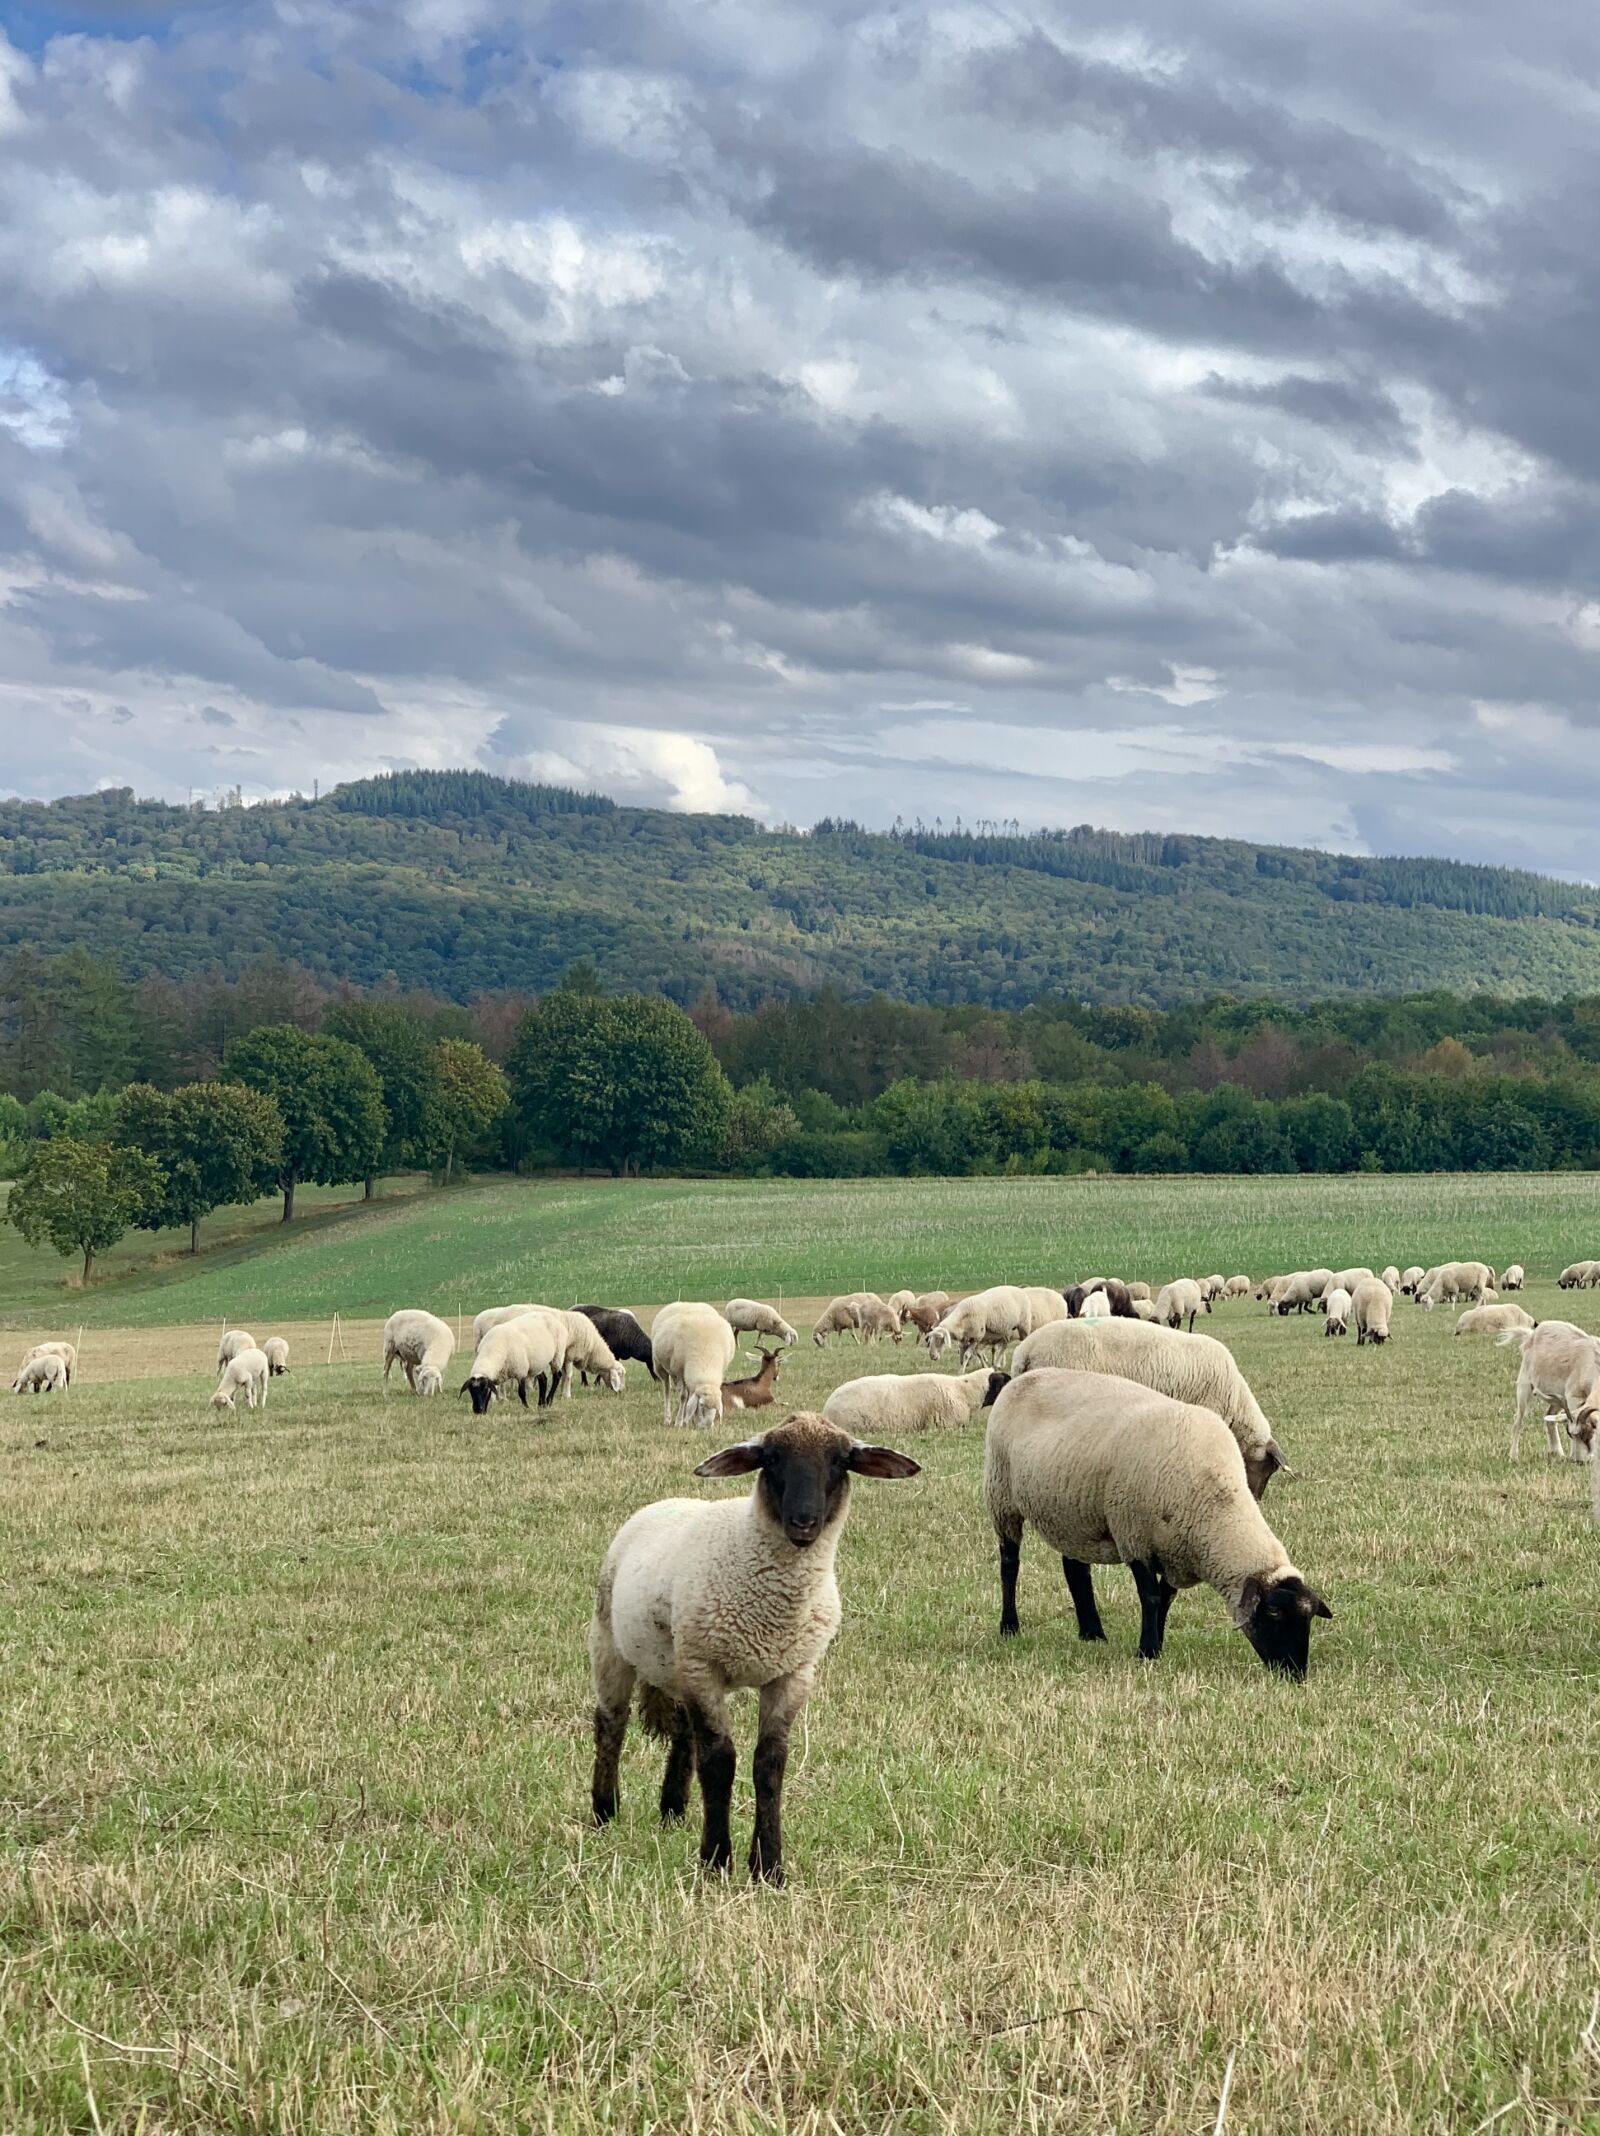 iPhone XS back dual camera 6mm f/2.4 sample photo. Westerwald, sheep, clouds photography